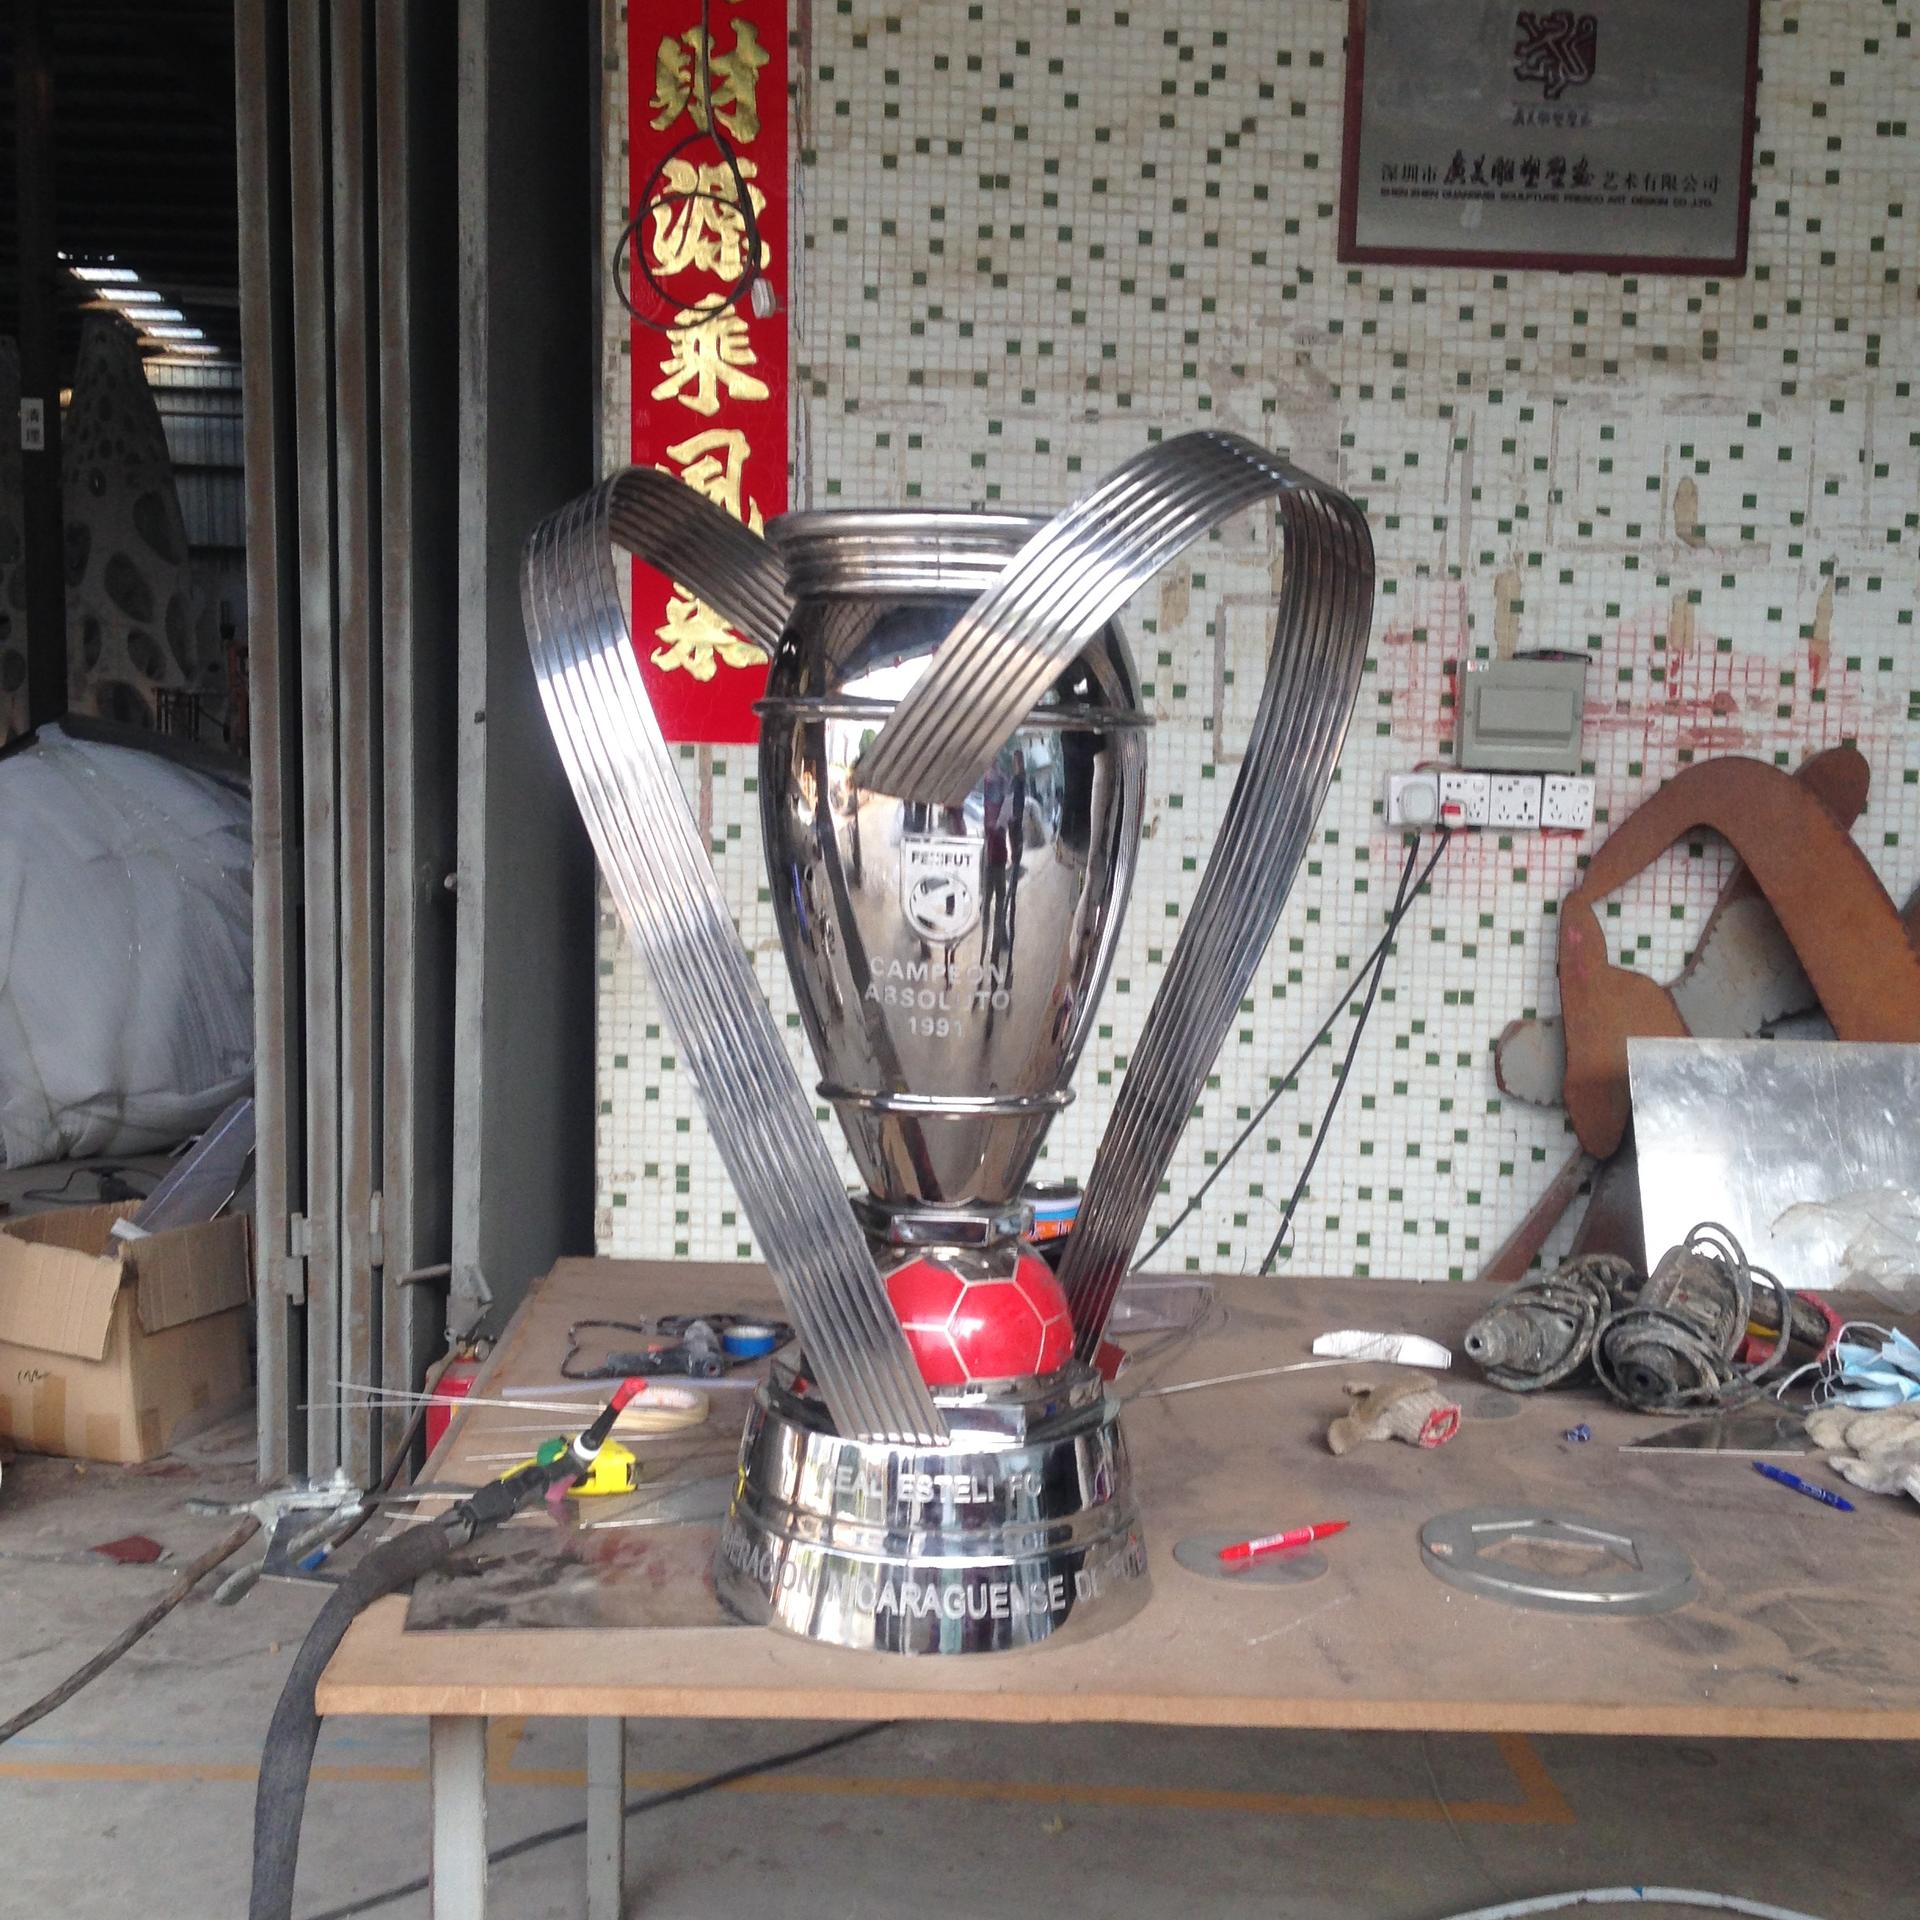 Custom Silver Polished Stainless Steel Sports Trophies